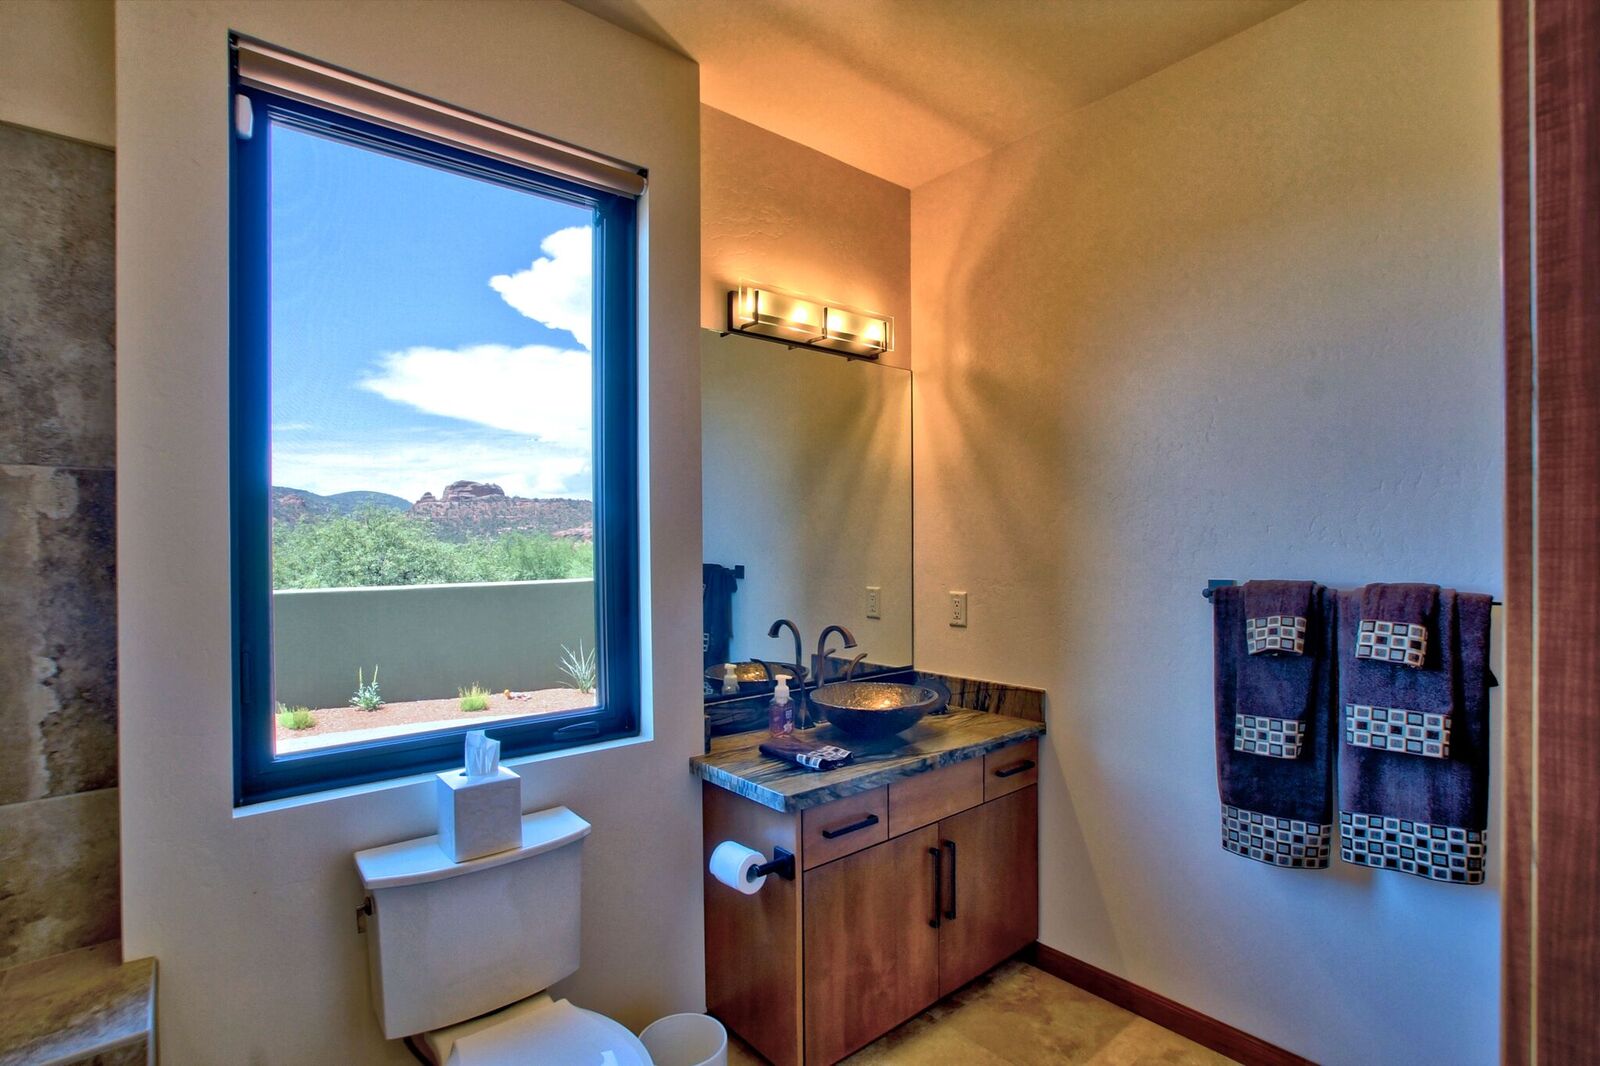 A bathroom with a large window and a view of the mountains.